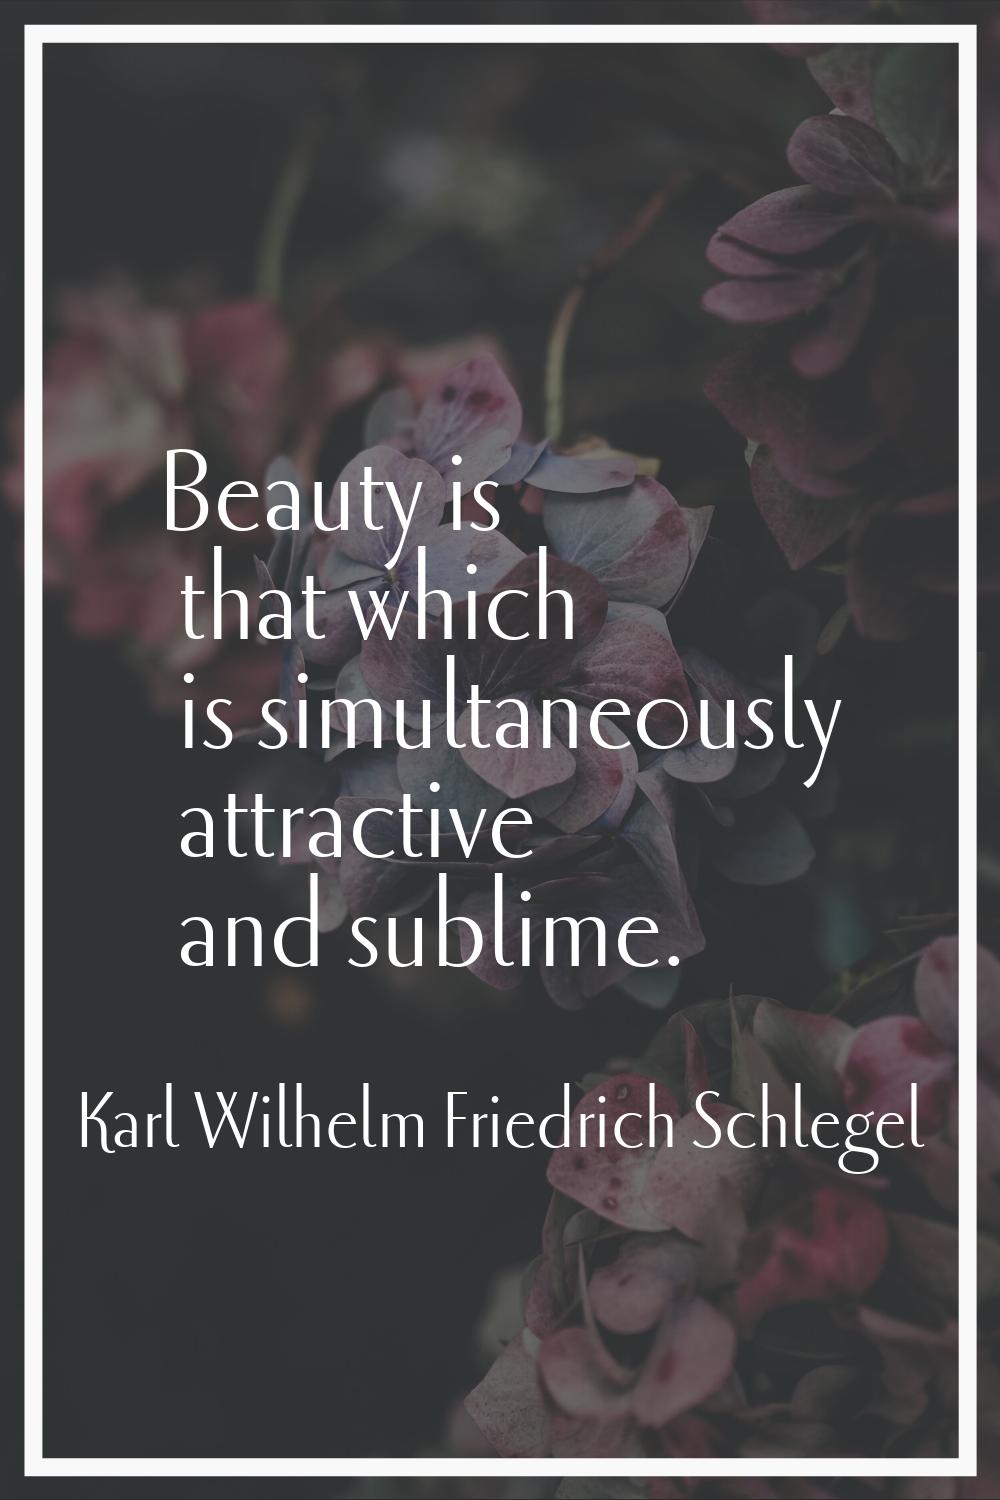 Beauty is that which is simultaneously attractive and sublime.